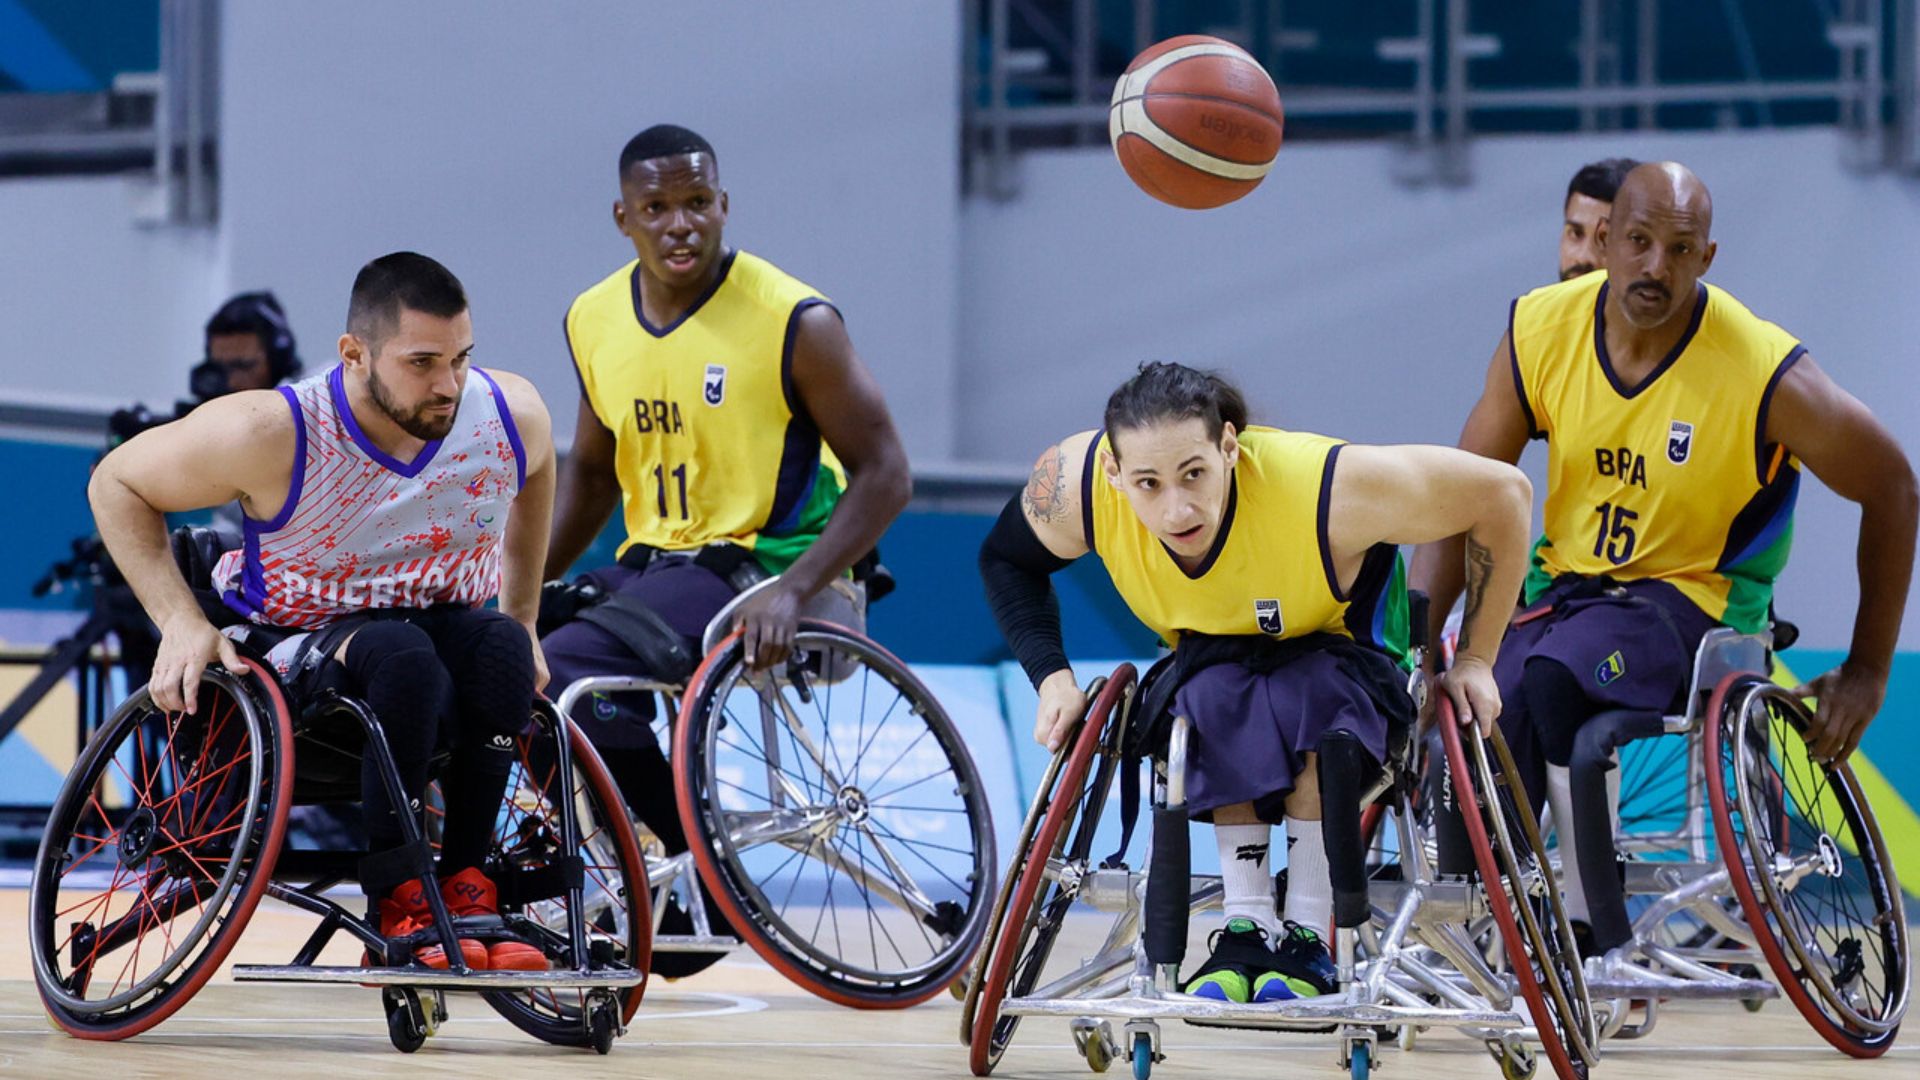 Brazil Secures Its First Victory in Wheelchair Basketball